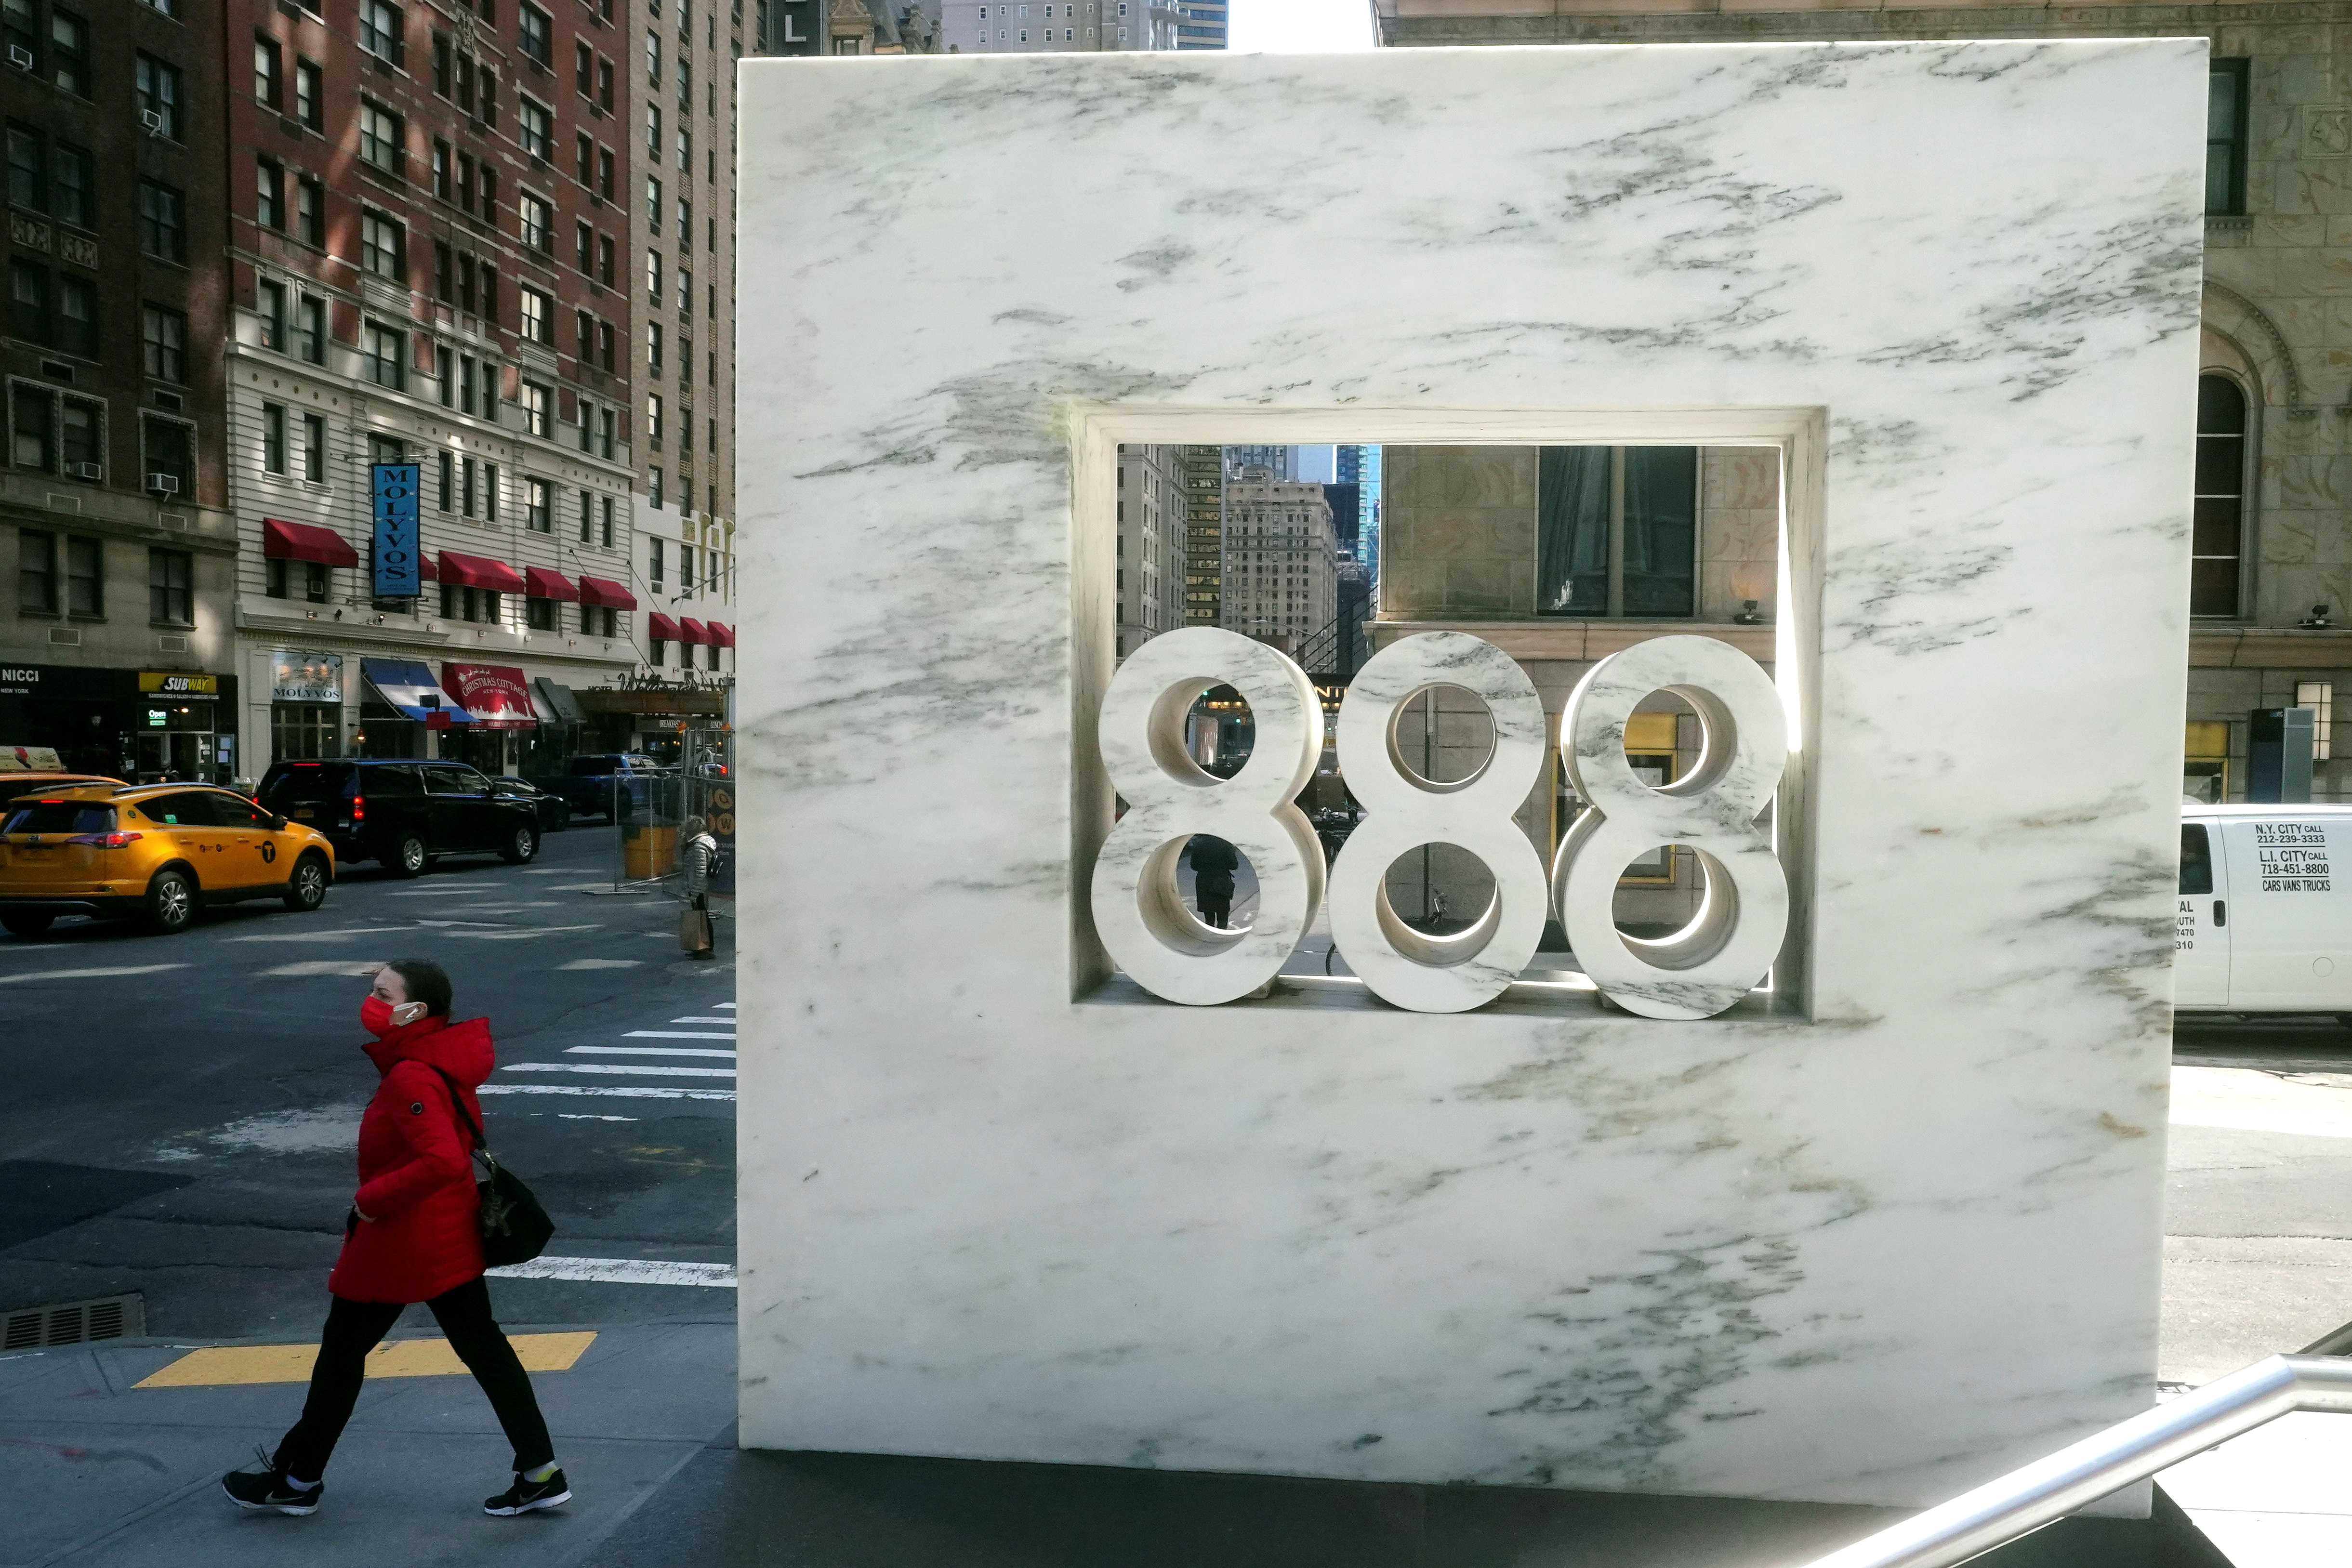 A person walks past 888 7th Ave, a building that reportedly houses Archegos Capital in New York City